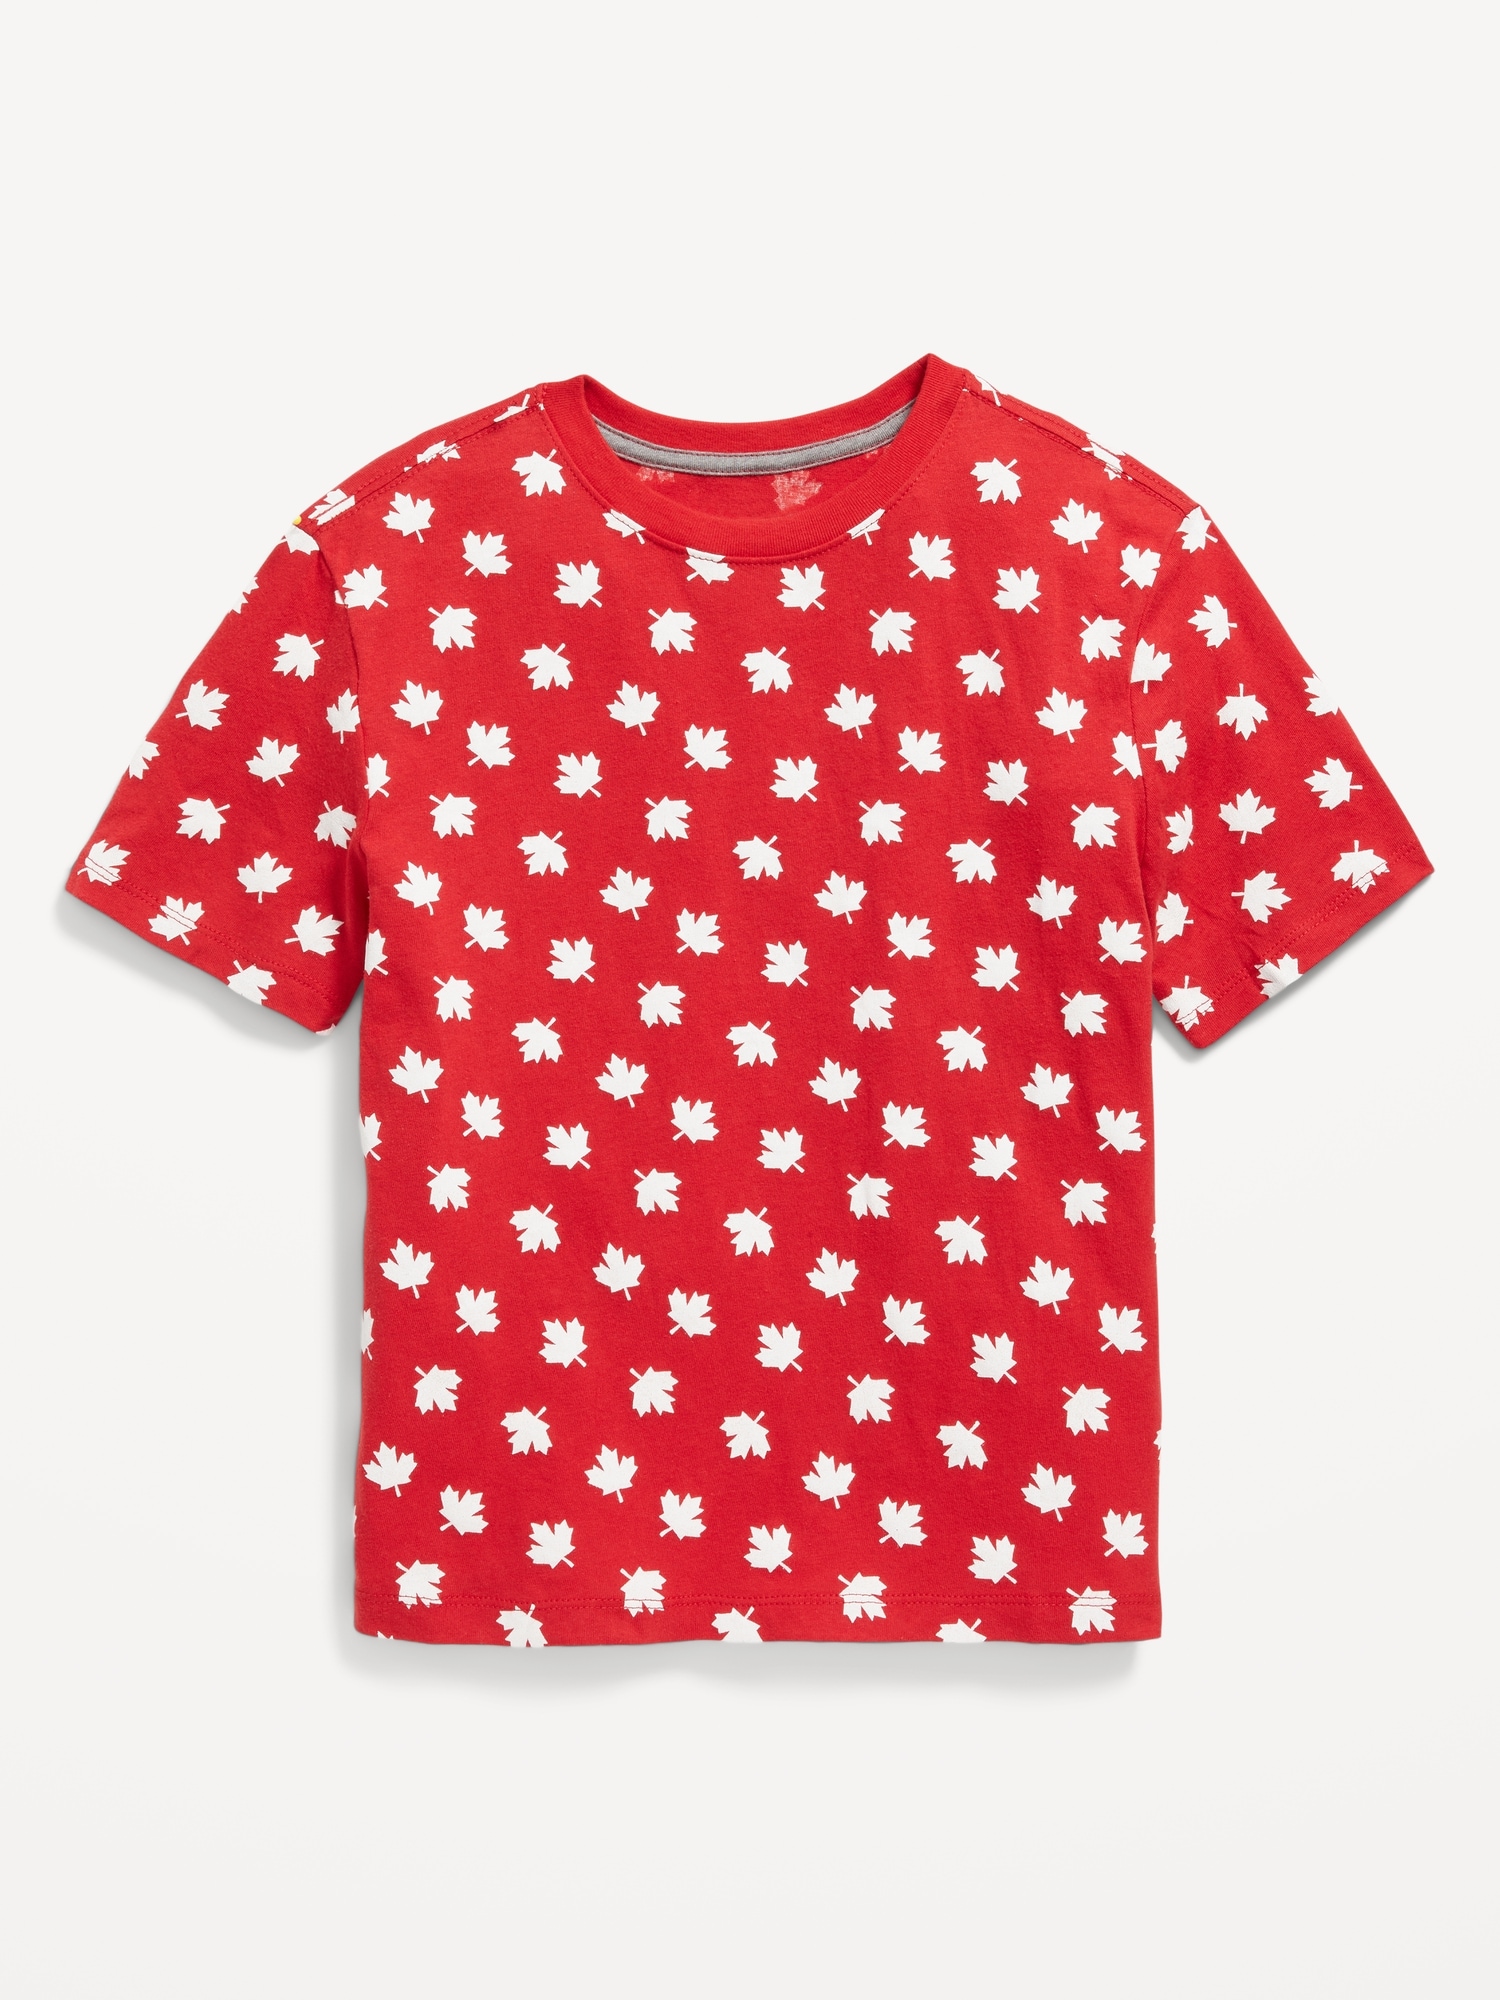 Printed Softest Crew-Neck T-Shirt for Boys